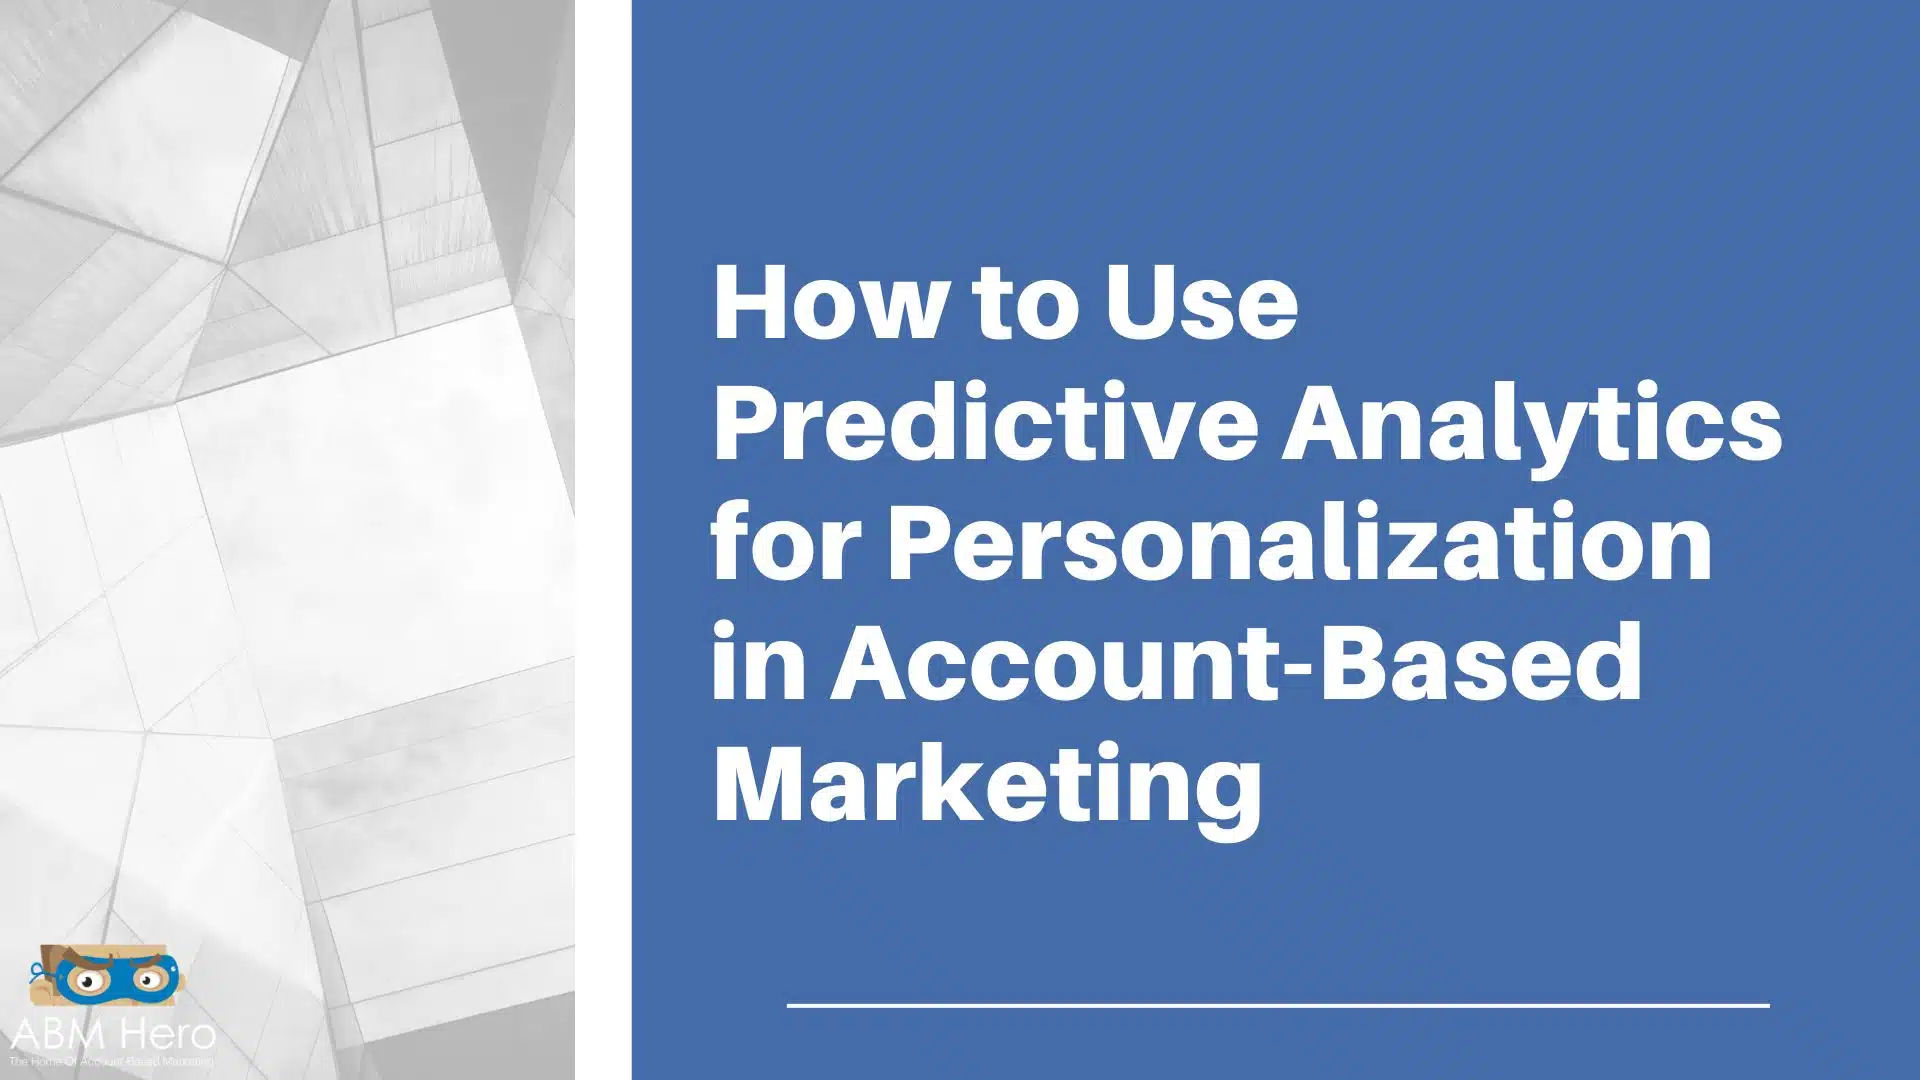 You are currently viewing How to Use Predictive Analytics for Personalization in Account-Based Marketing